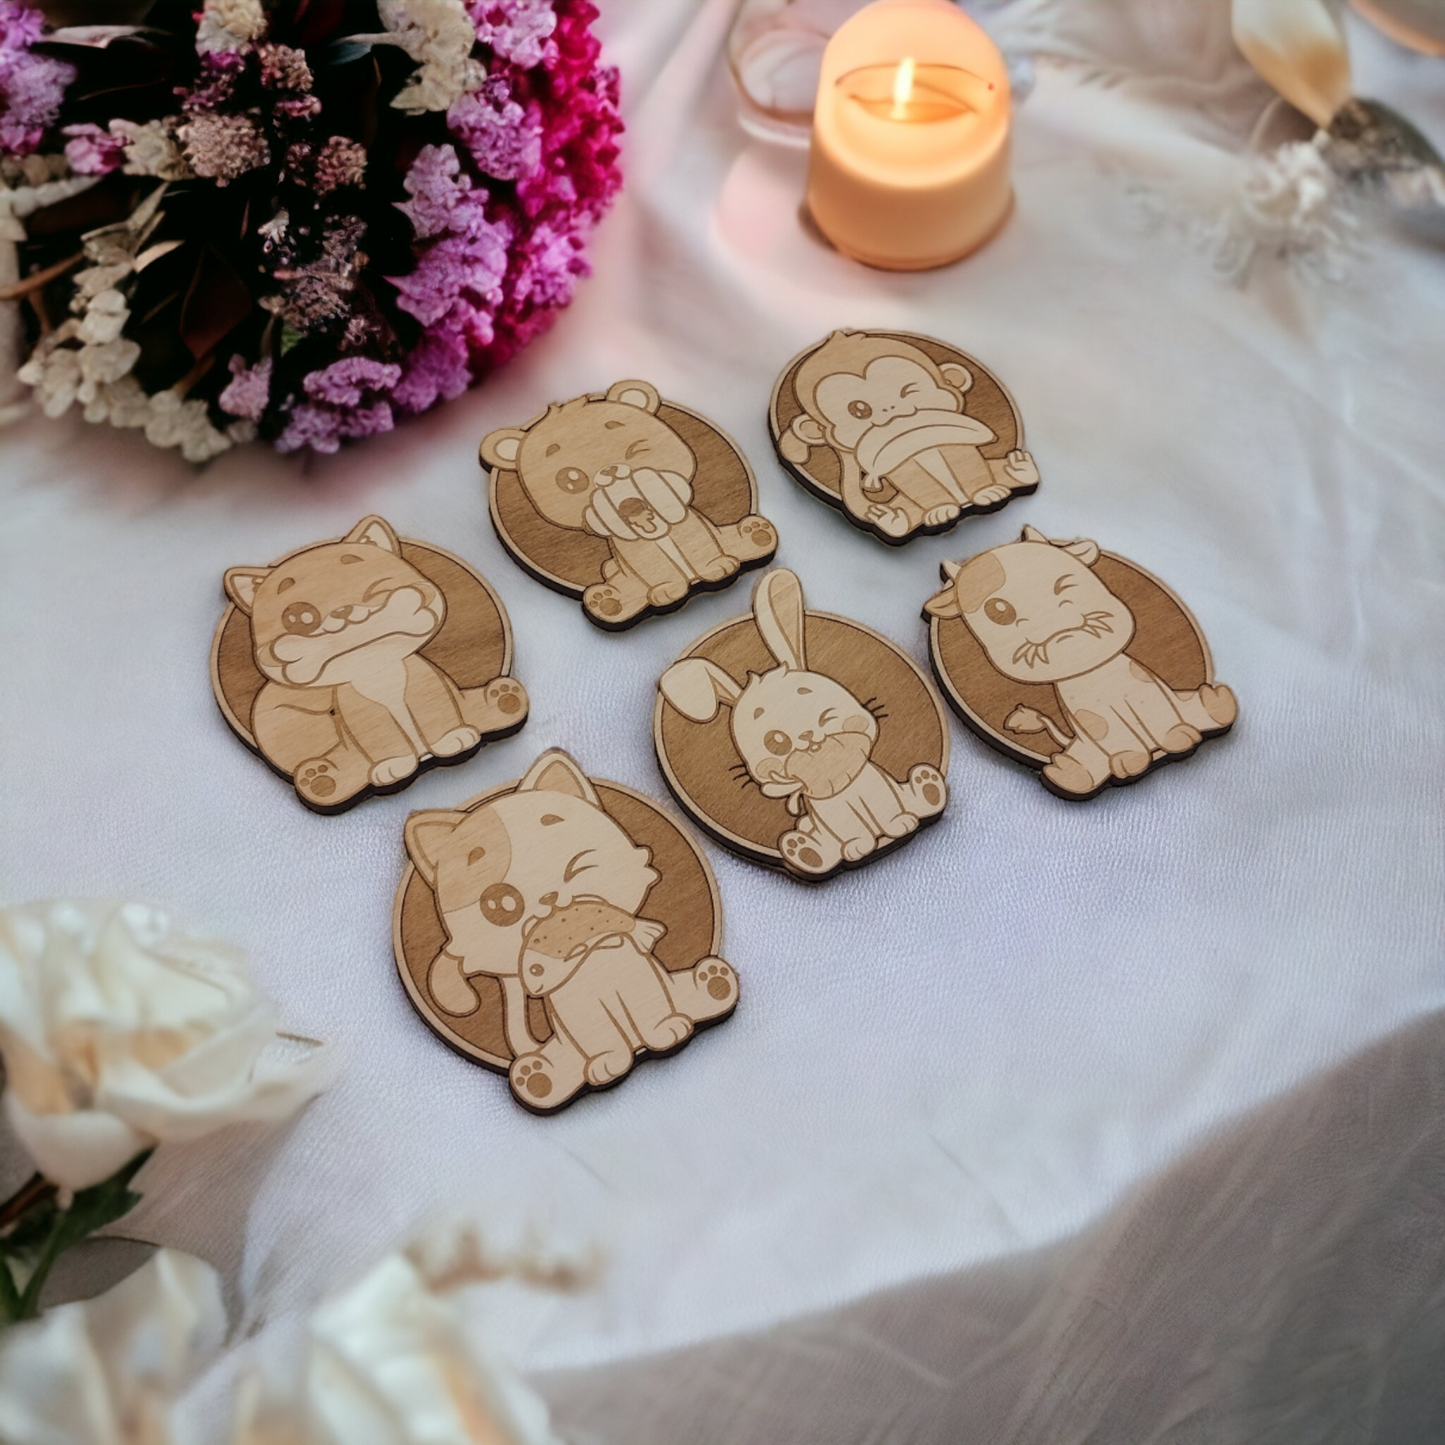 Set of 6 Cute Animals Collection Wooden Coasters - Handmade Gift - Housewarming - Wood Kitchenware-2